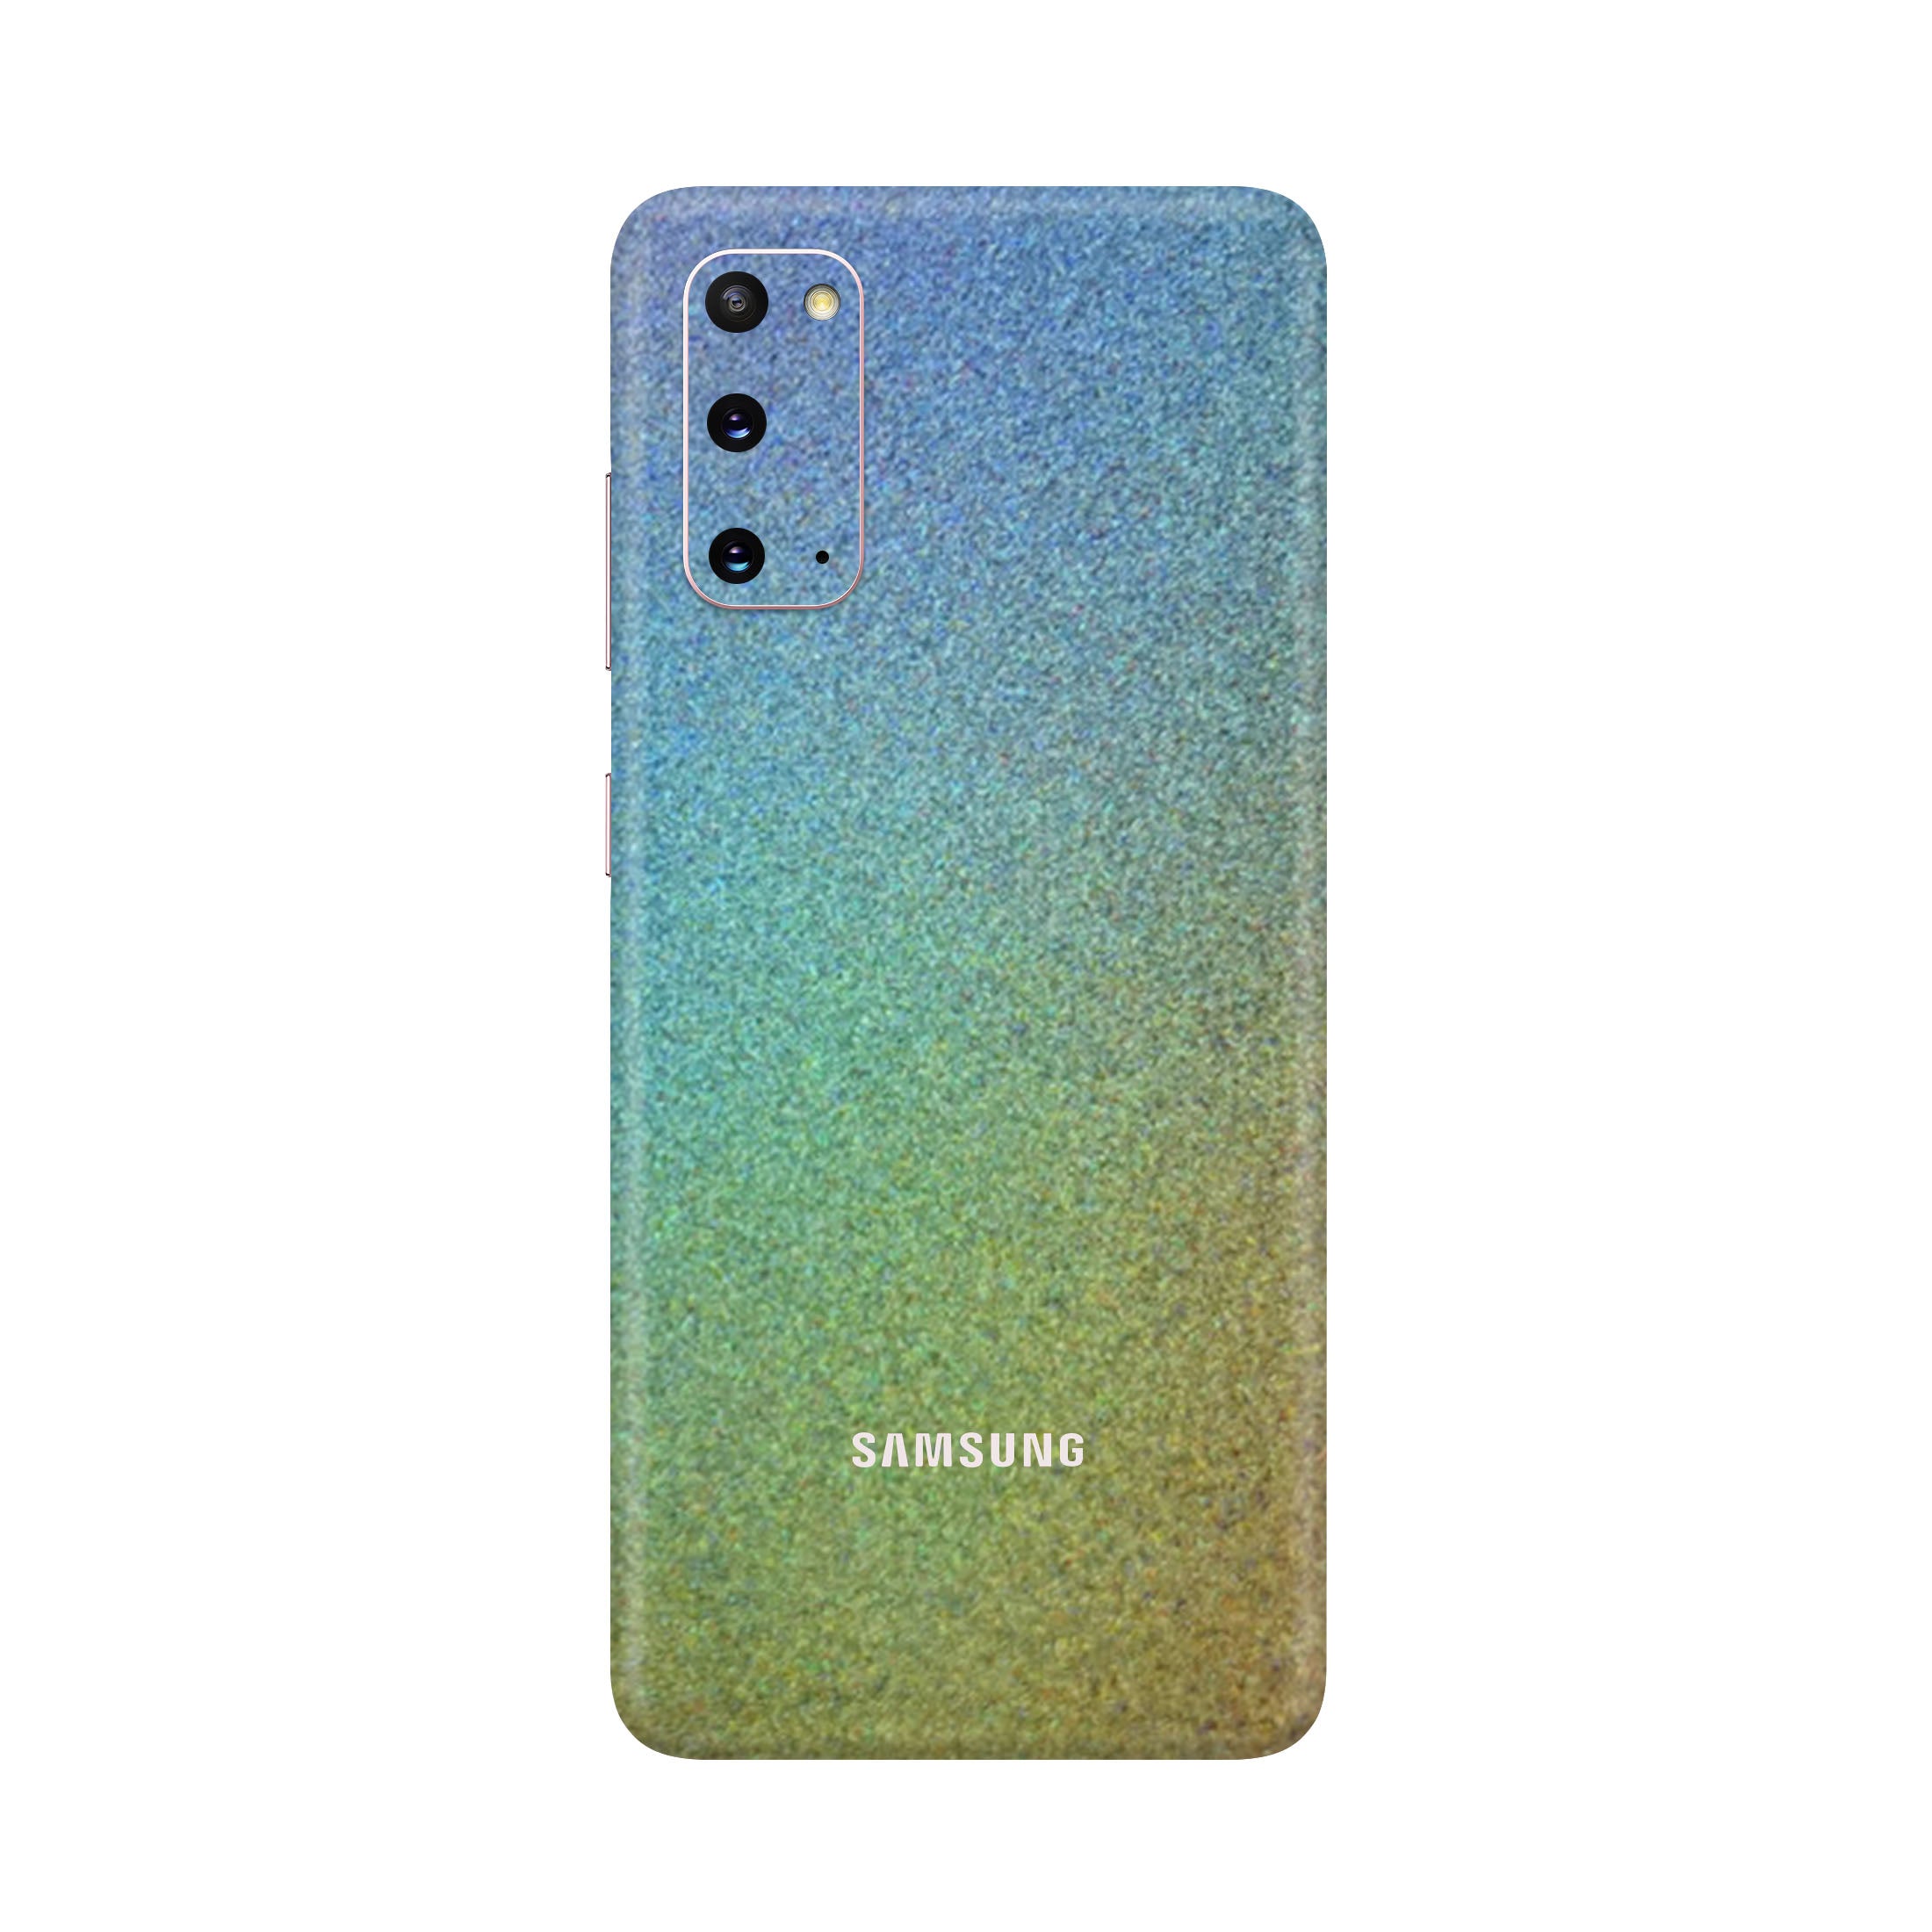 Gloss Flip Psychedelic Skin for Samsung S20 Plus